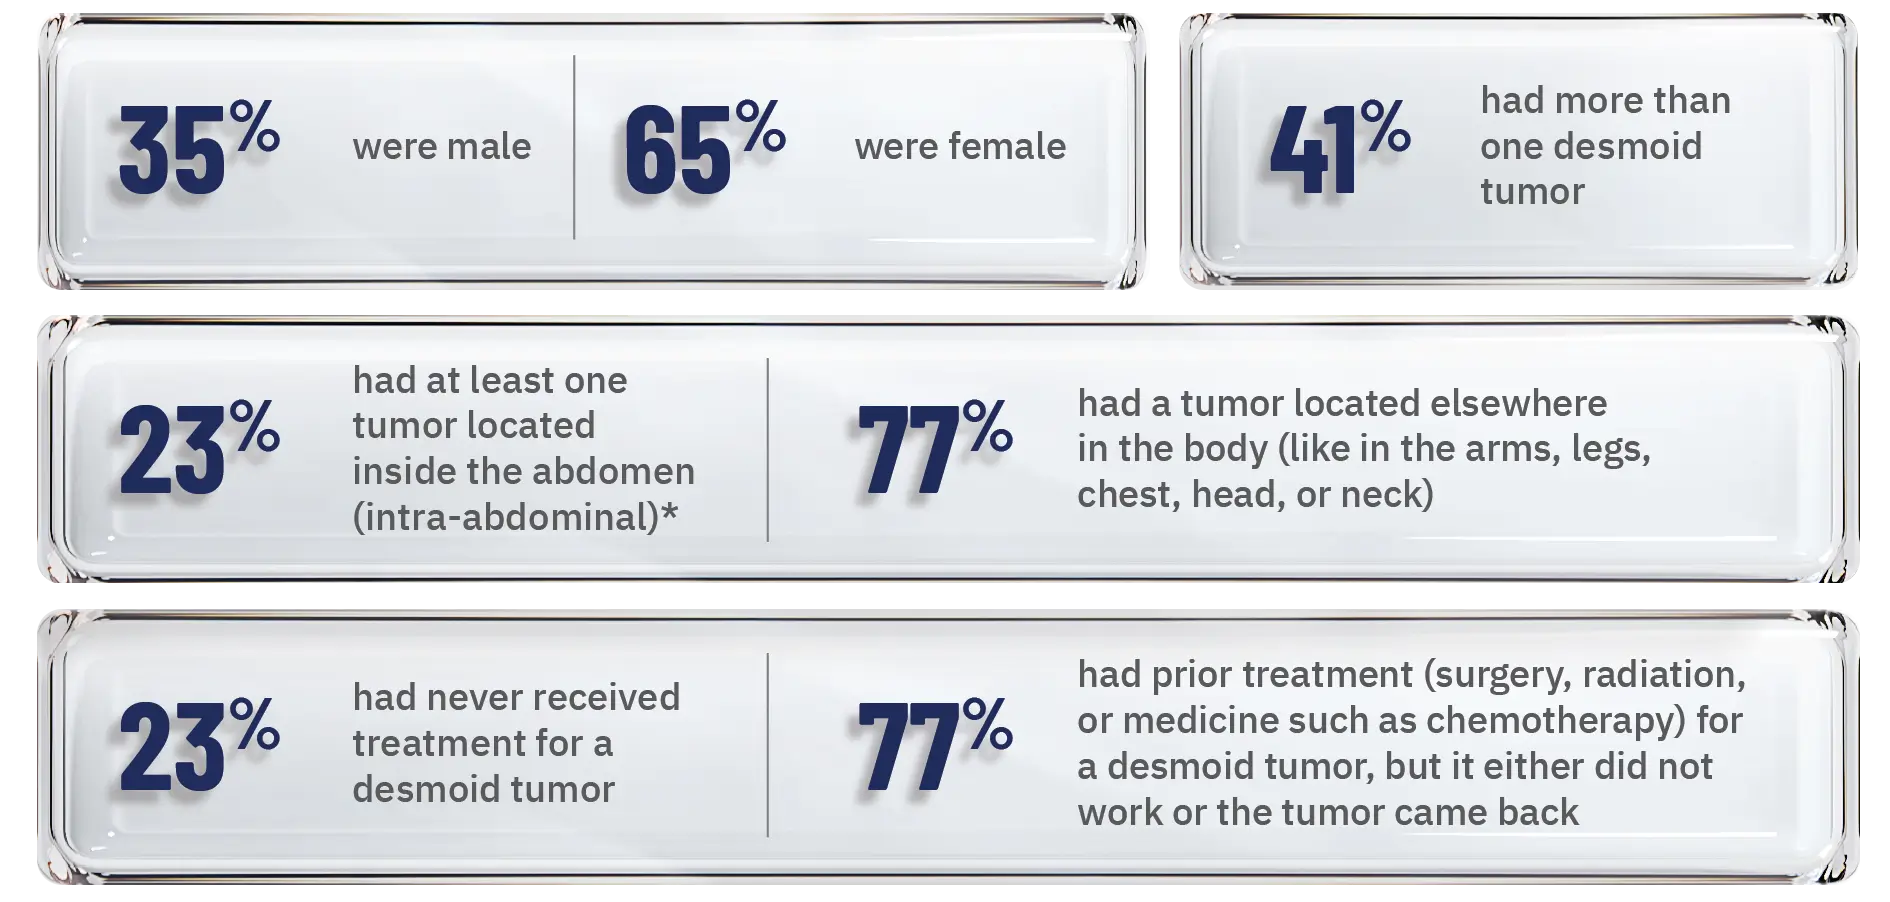 35% were male. 65% were female. 41% had more than one desmoid tumor. 23% had at least one tumor located inside the abdomen (intra-abdominal)*. 77% had a tumor located elsewhere in the body (like in the arms, legs, chest, head, or neck). 23% had never received treatment for a desmoid tumor. 77% had prior treatment (surgery, radiation, or medicine such as chemotherapy) for a desmoid tumor, but it either did not work or the tumor came back.